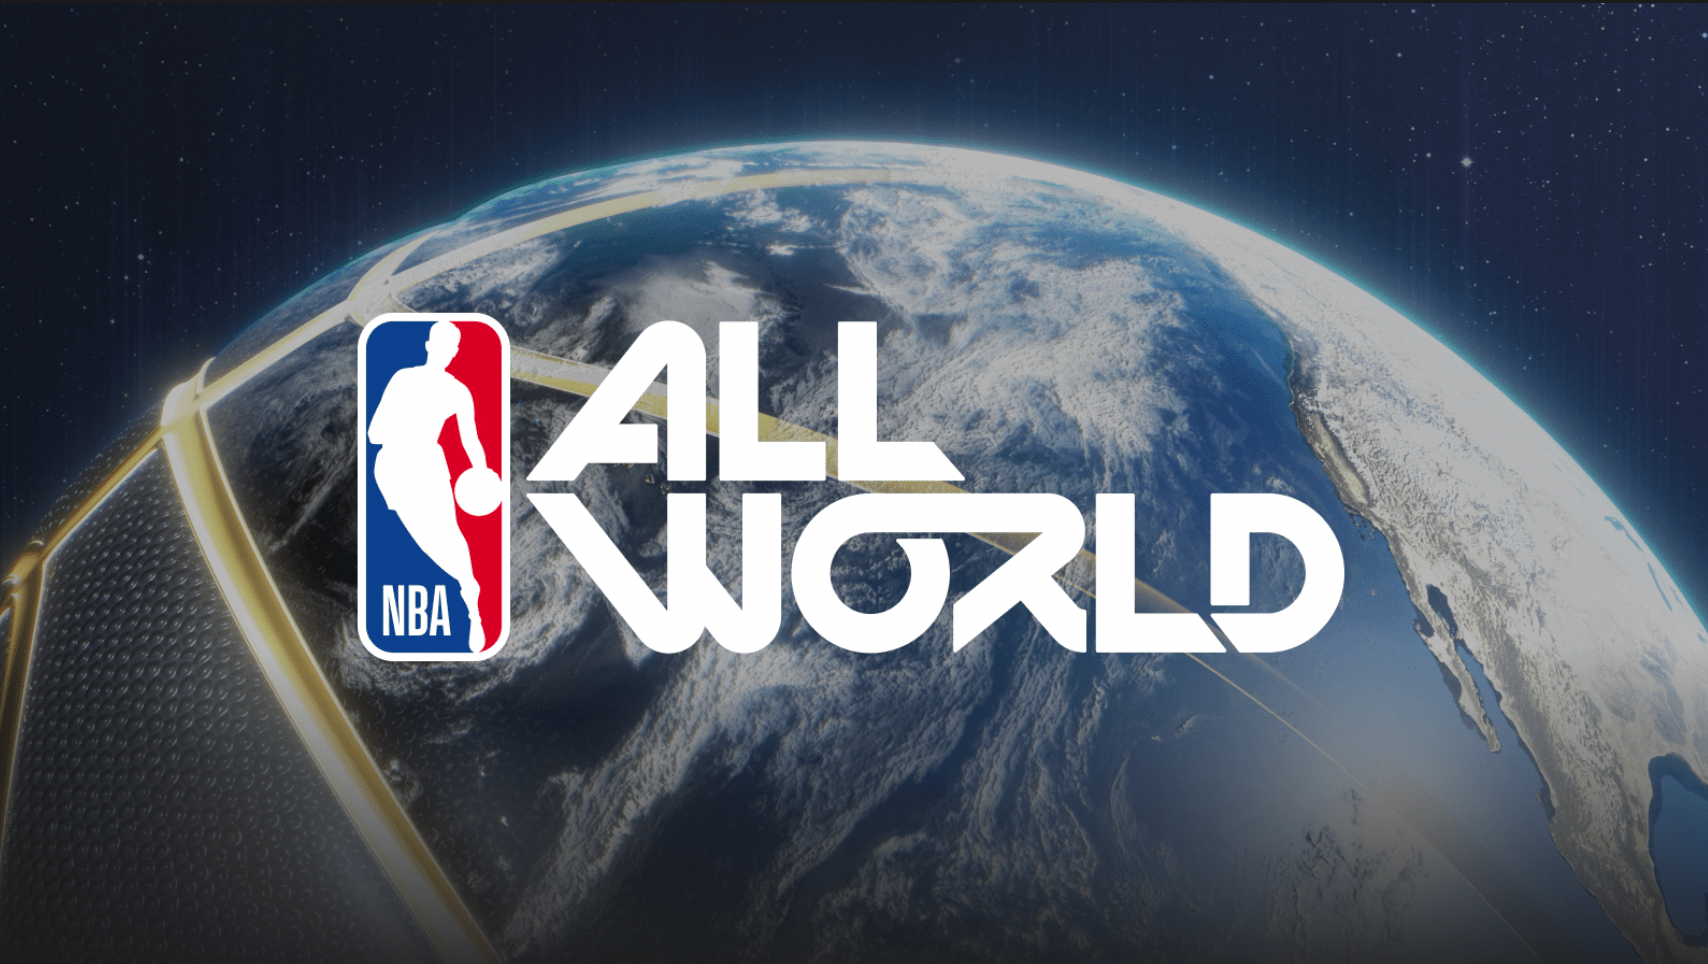 New NBA All-World Mobile Basketball Game App: It’s Game-Time